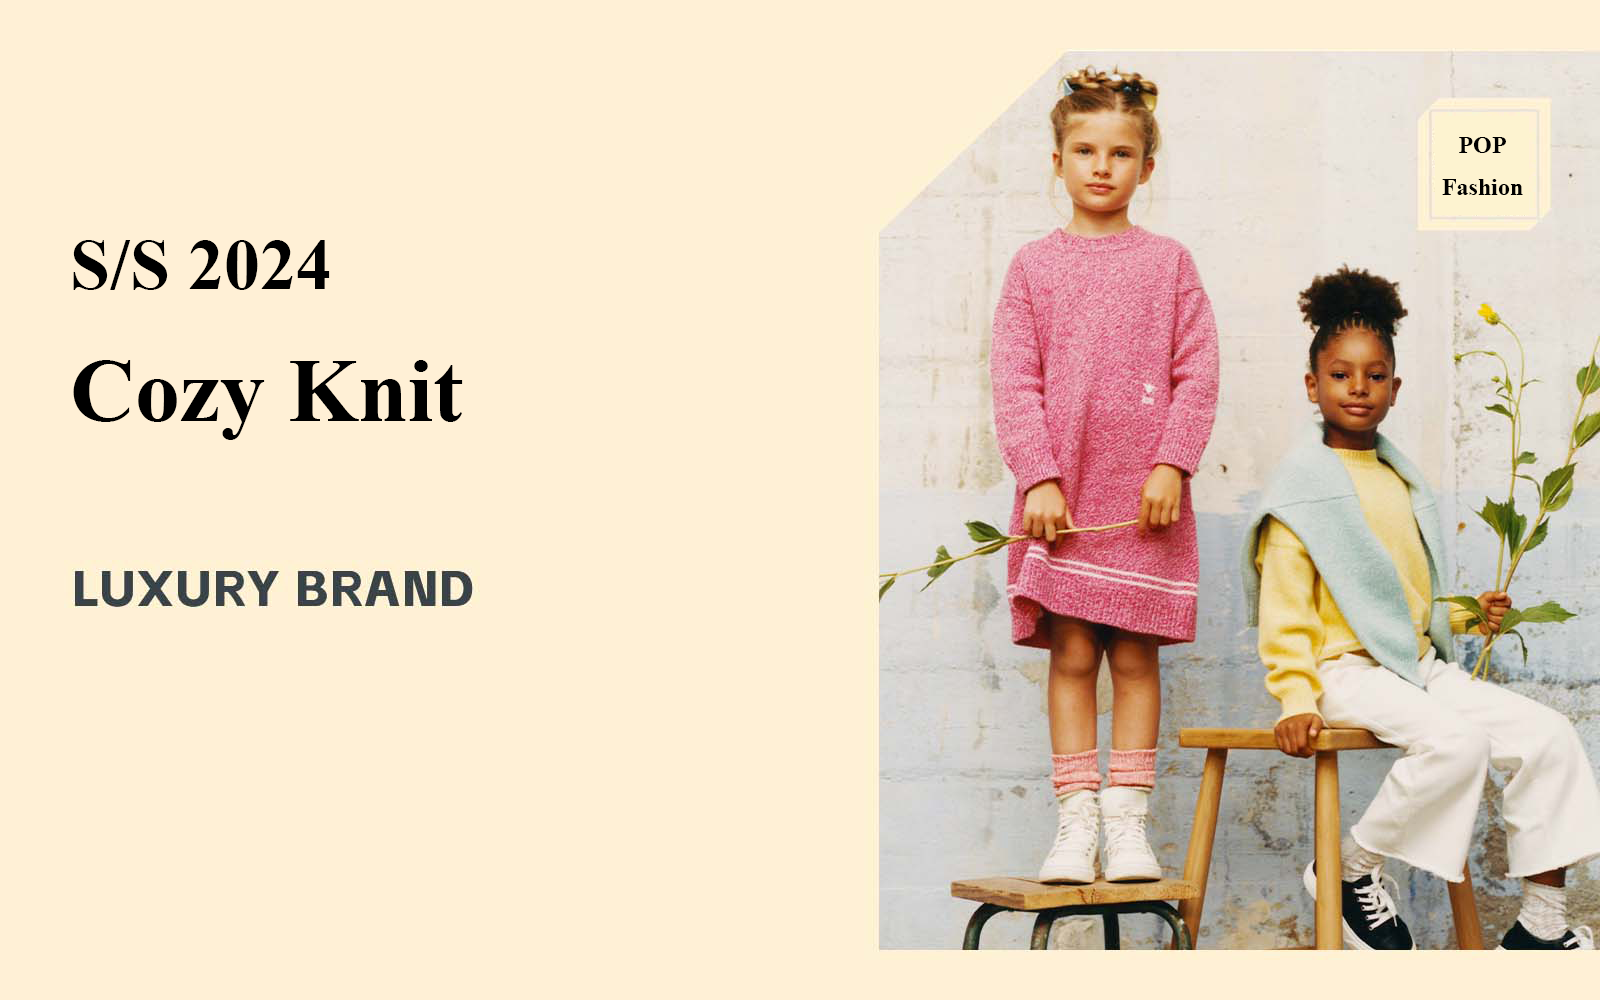 Cozy Knit -- The Comprehensive Analysis of Luxury Kids' Knitwear Brand